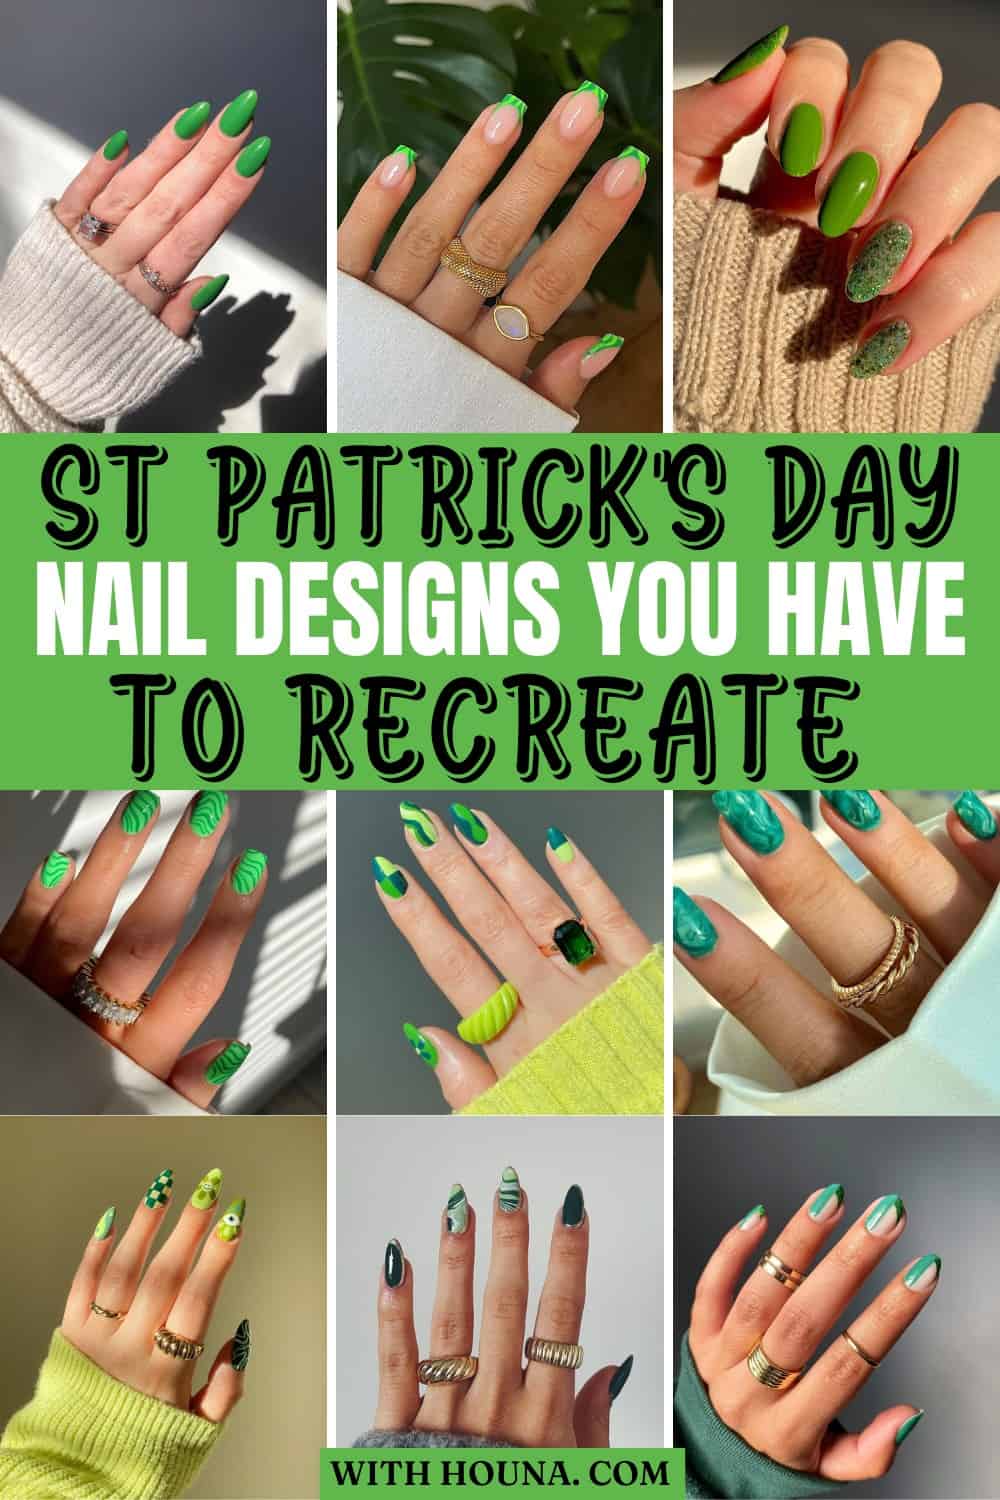 35 St Patrick's Day Nail Designs You'll Want to Recreate - With Houna